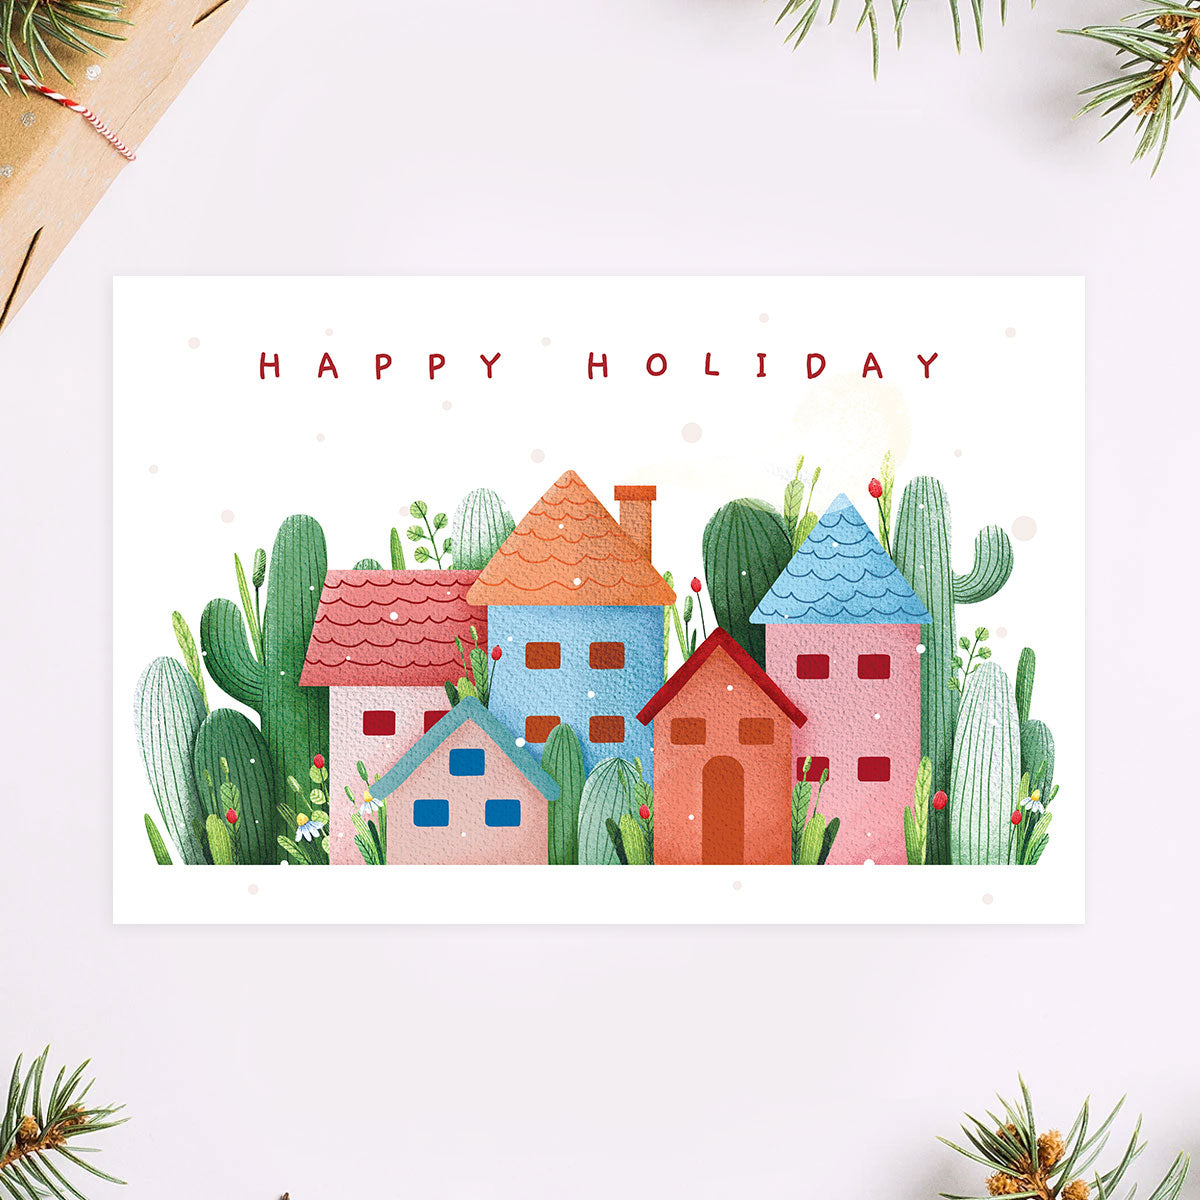 Happy Holiday Card for sale, Succulent Happy Holiday Card for sale, Cactus Greeting Card, Succulents Greeting Card, Succulents Gift Ideas, Happy Holiday Cactus Card, Happy Holiday Succulents Card